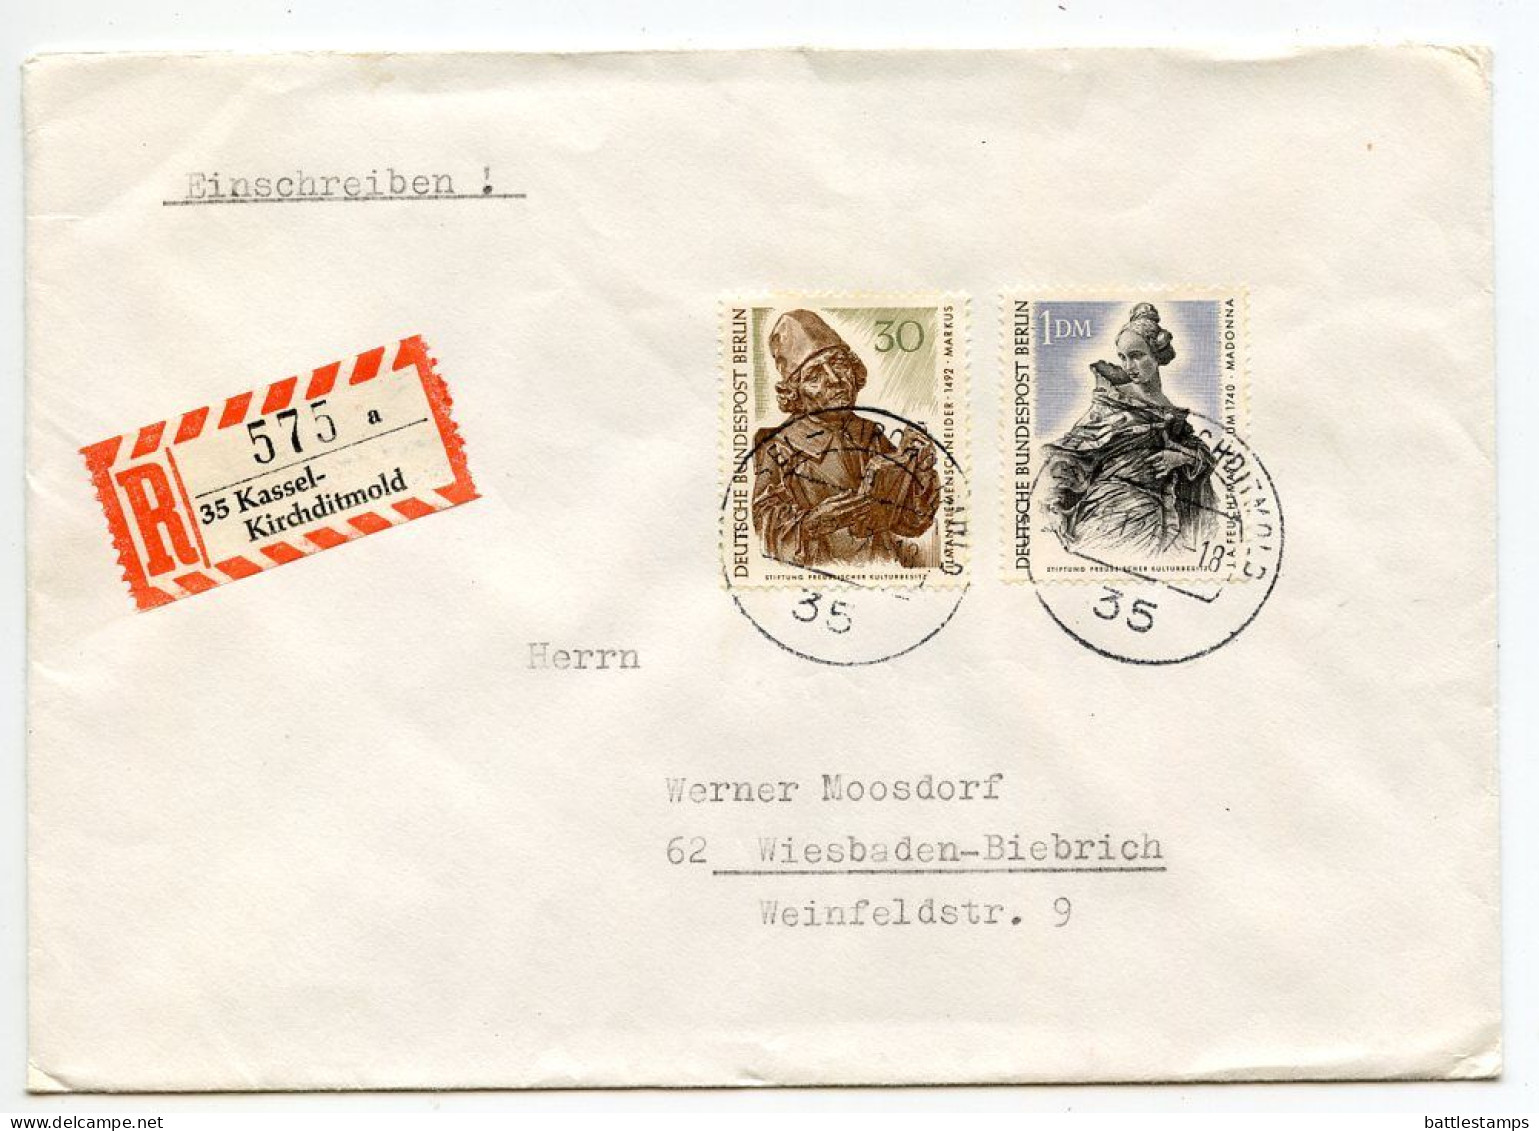 Germany, West 1967 Registered Cover Kassel-Kirchditmold To Wiesbaden-Biebrich; Berlin Stamps - 30pf. & 1m. Berlin Art - Covers & Documents